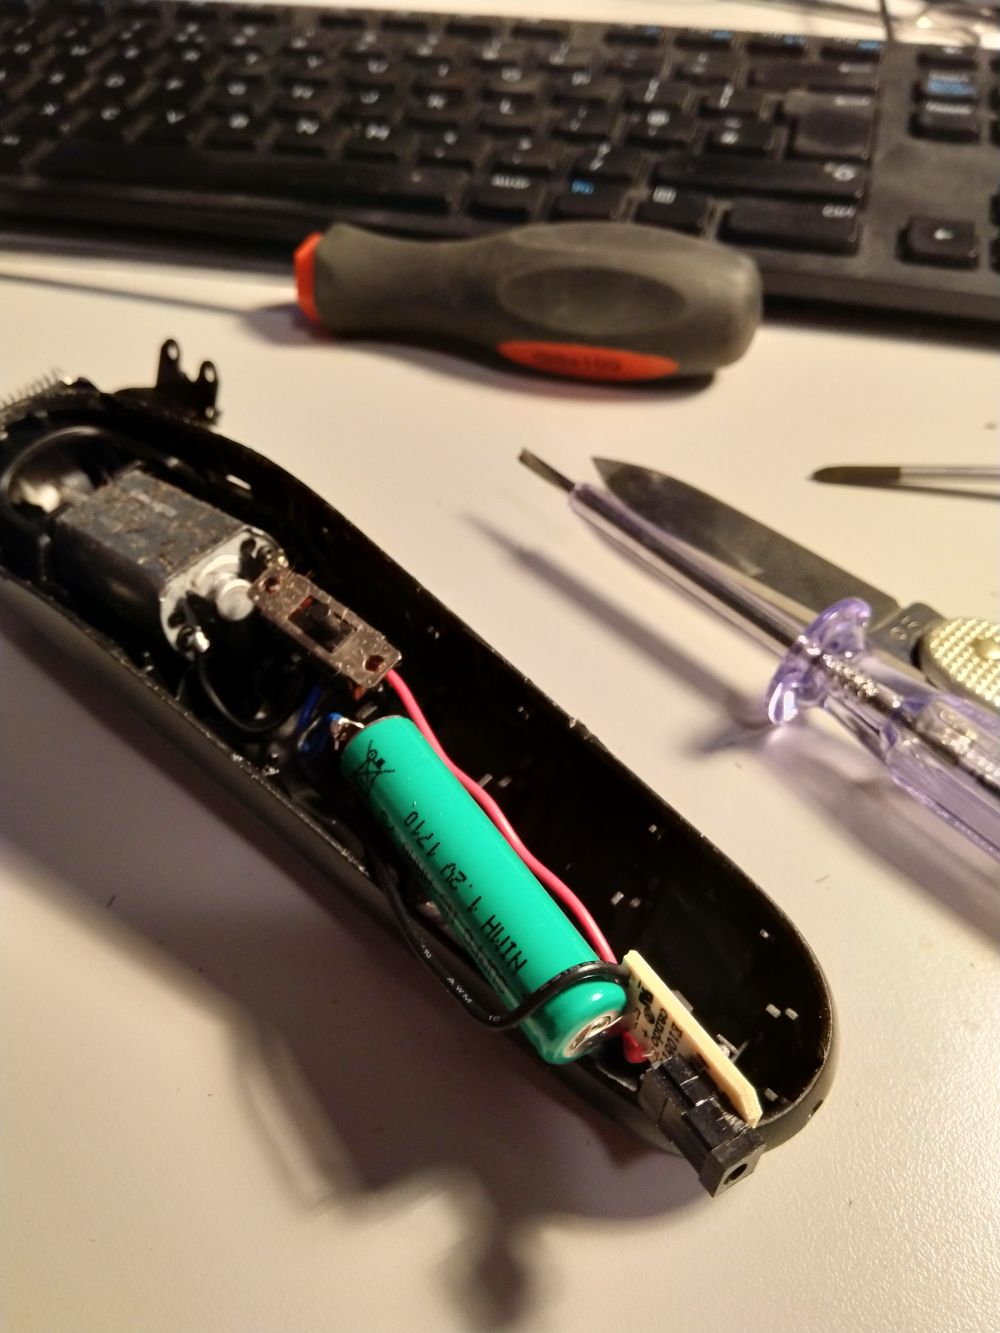 (showing insides of Braun 5516 with battery soldered to the cables)